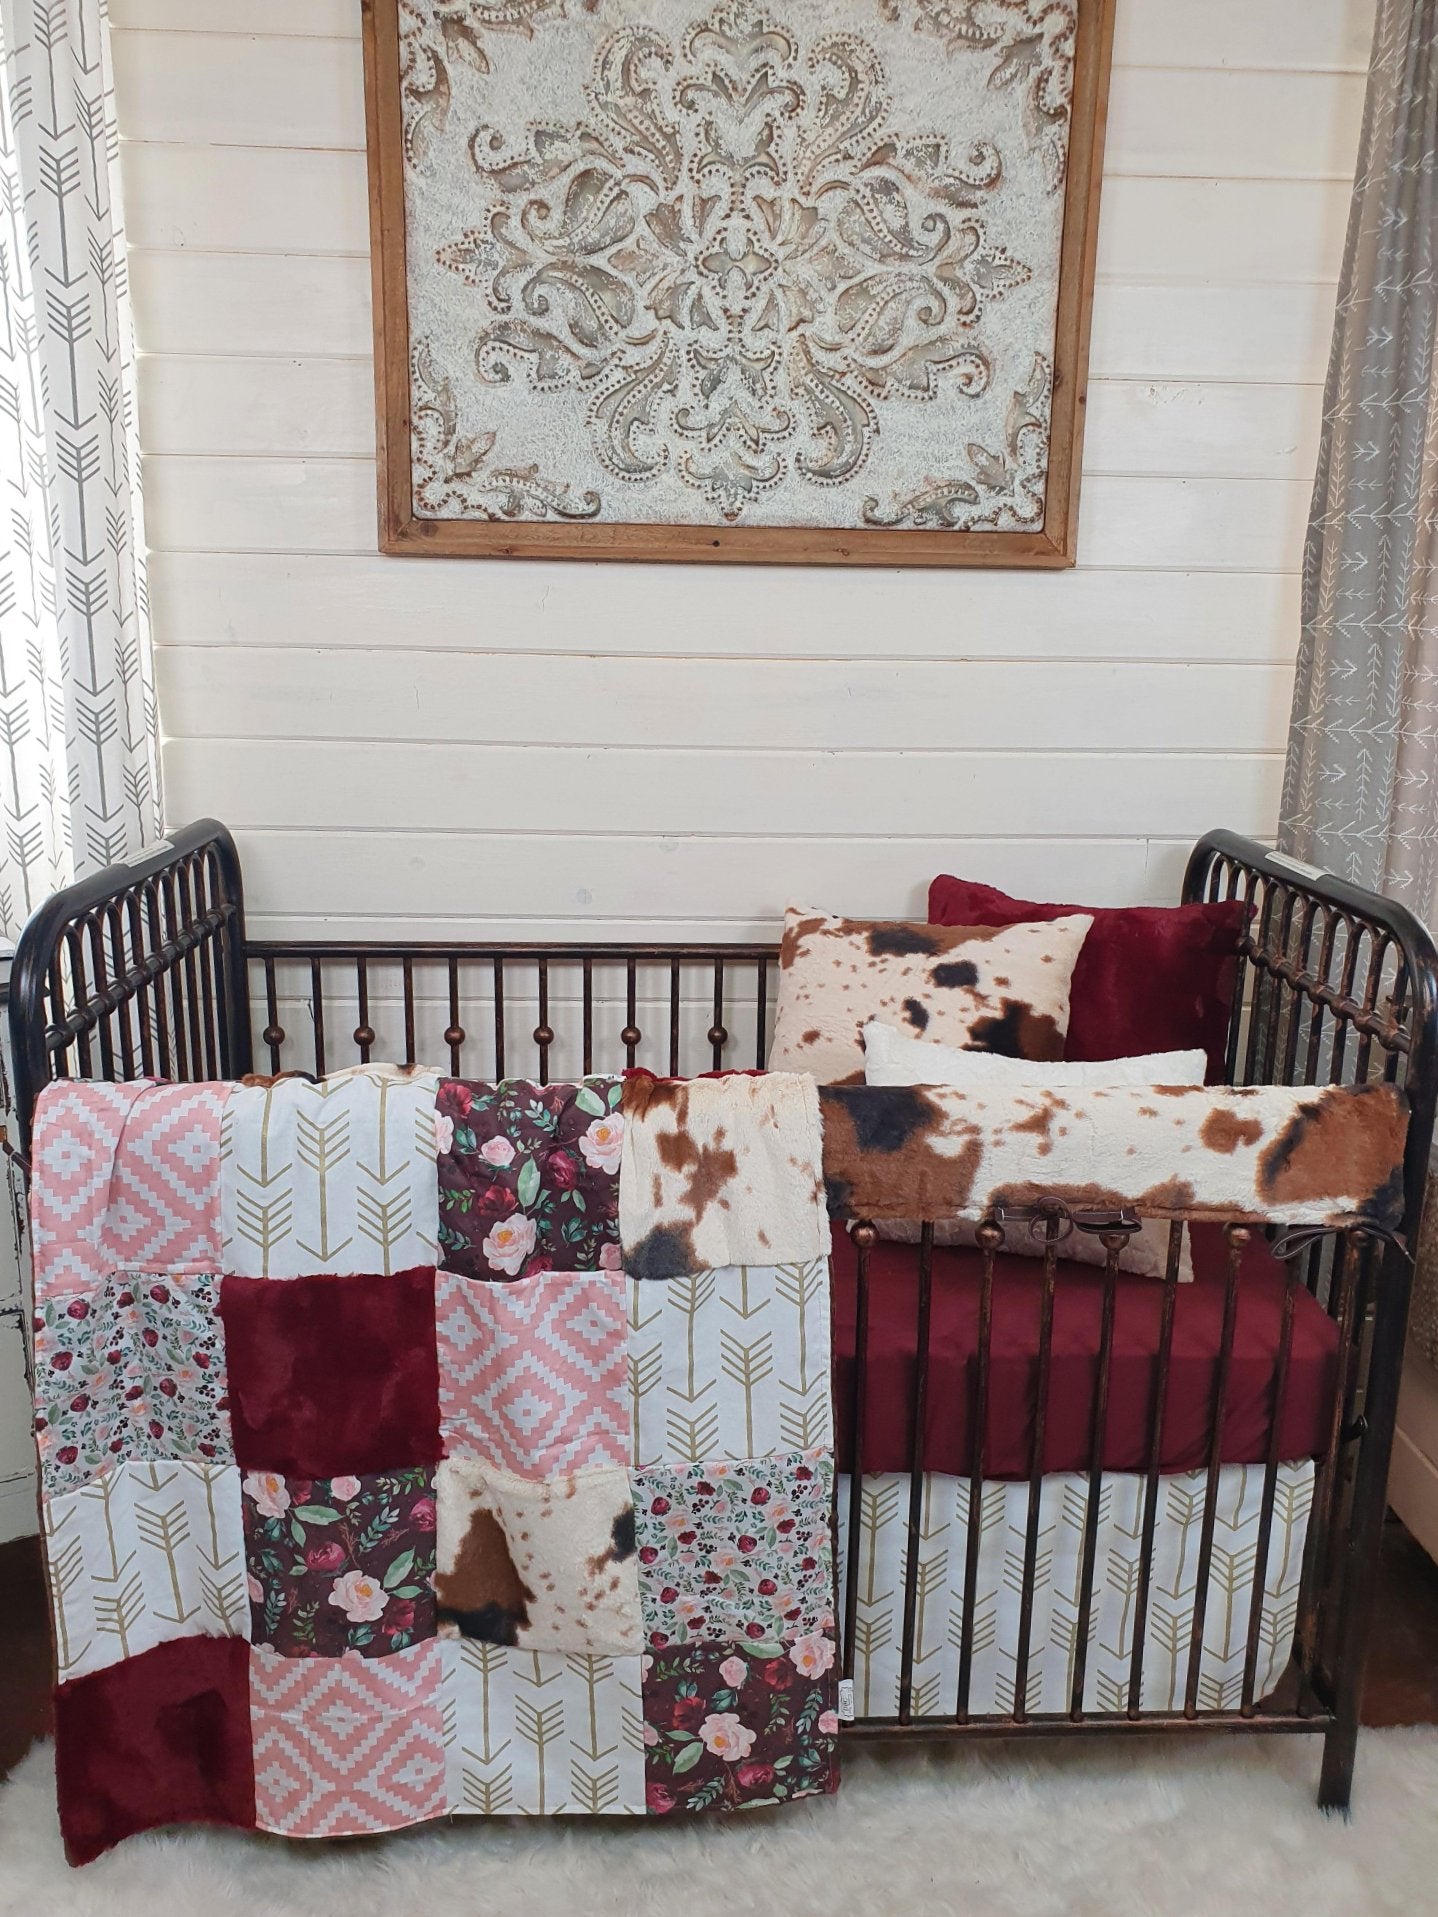 Custom Girl Crib Bedding - Wine Floral and Cow Minky Nursery Collection - DBC Baby Bedding Co 